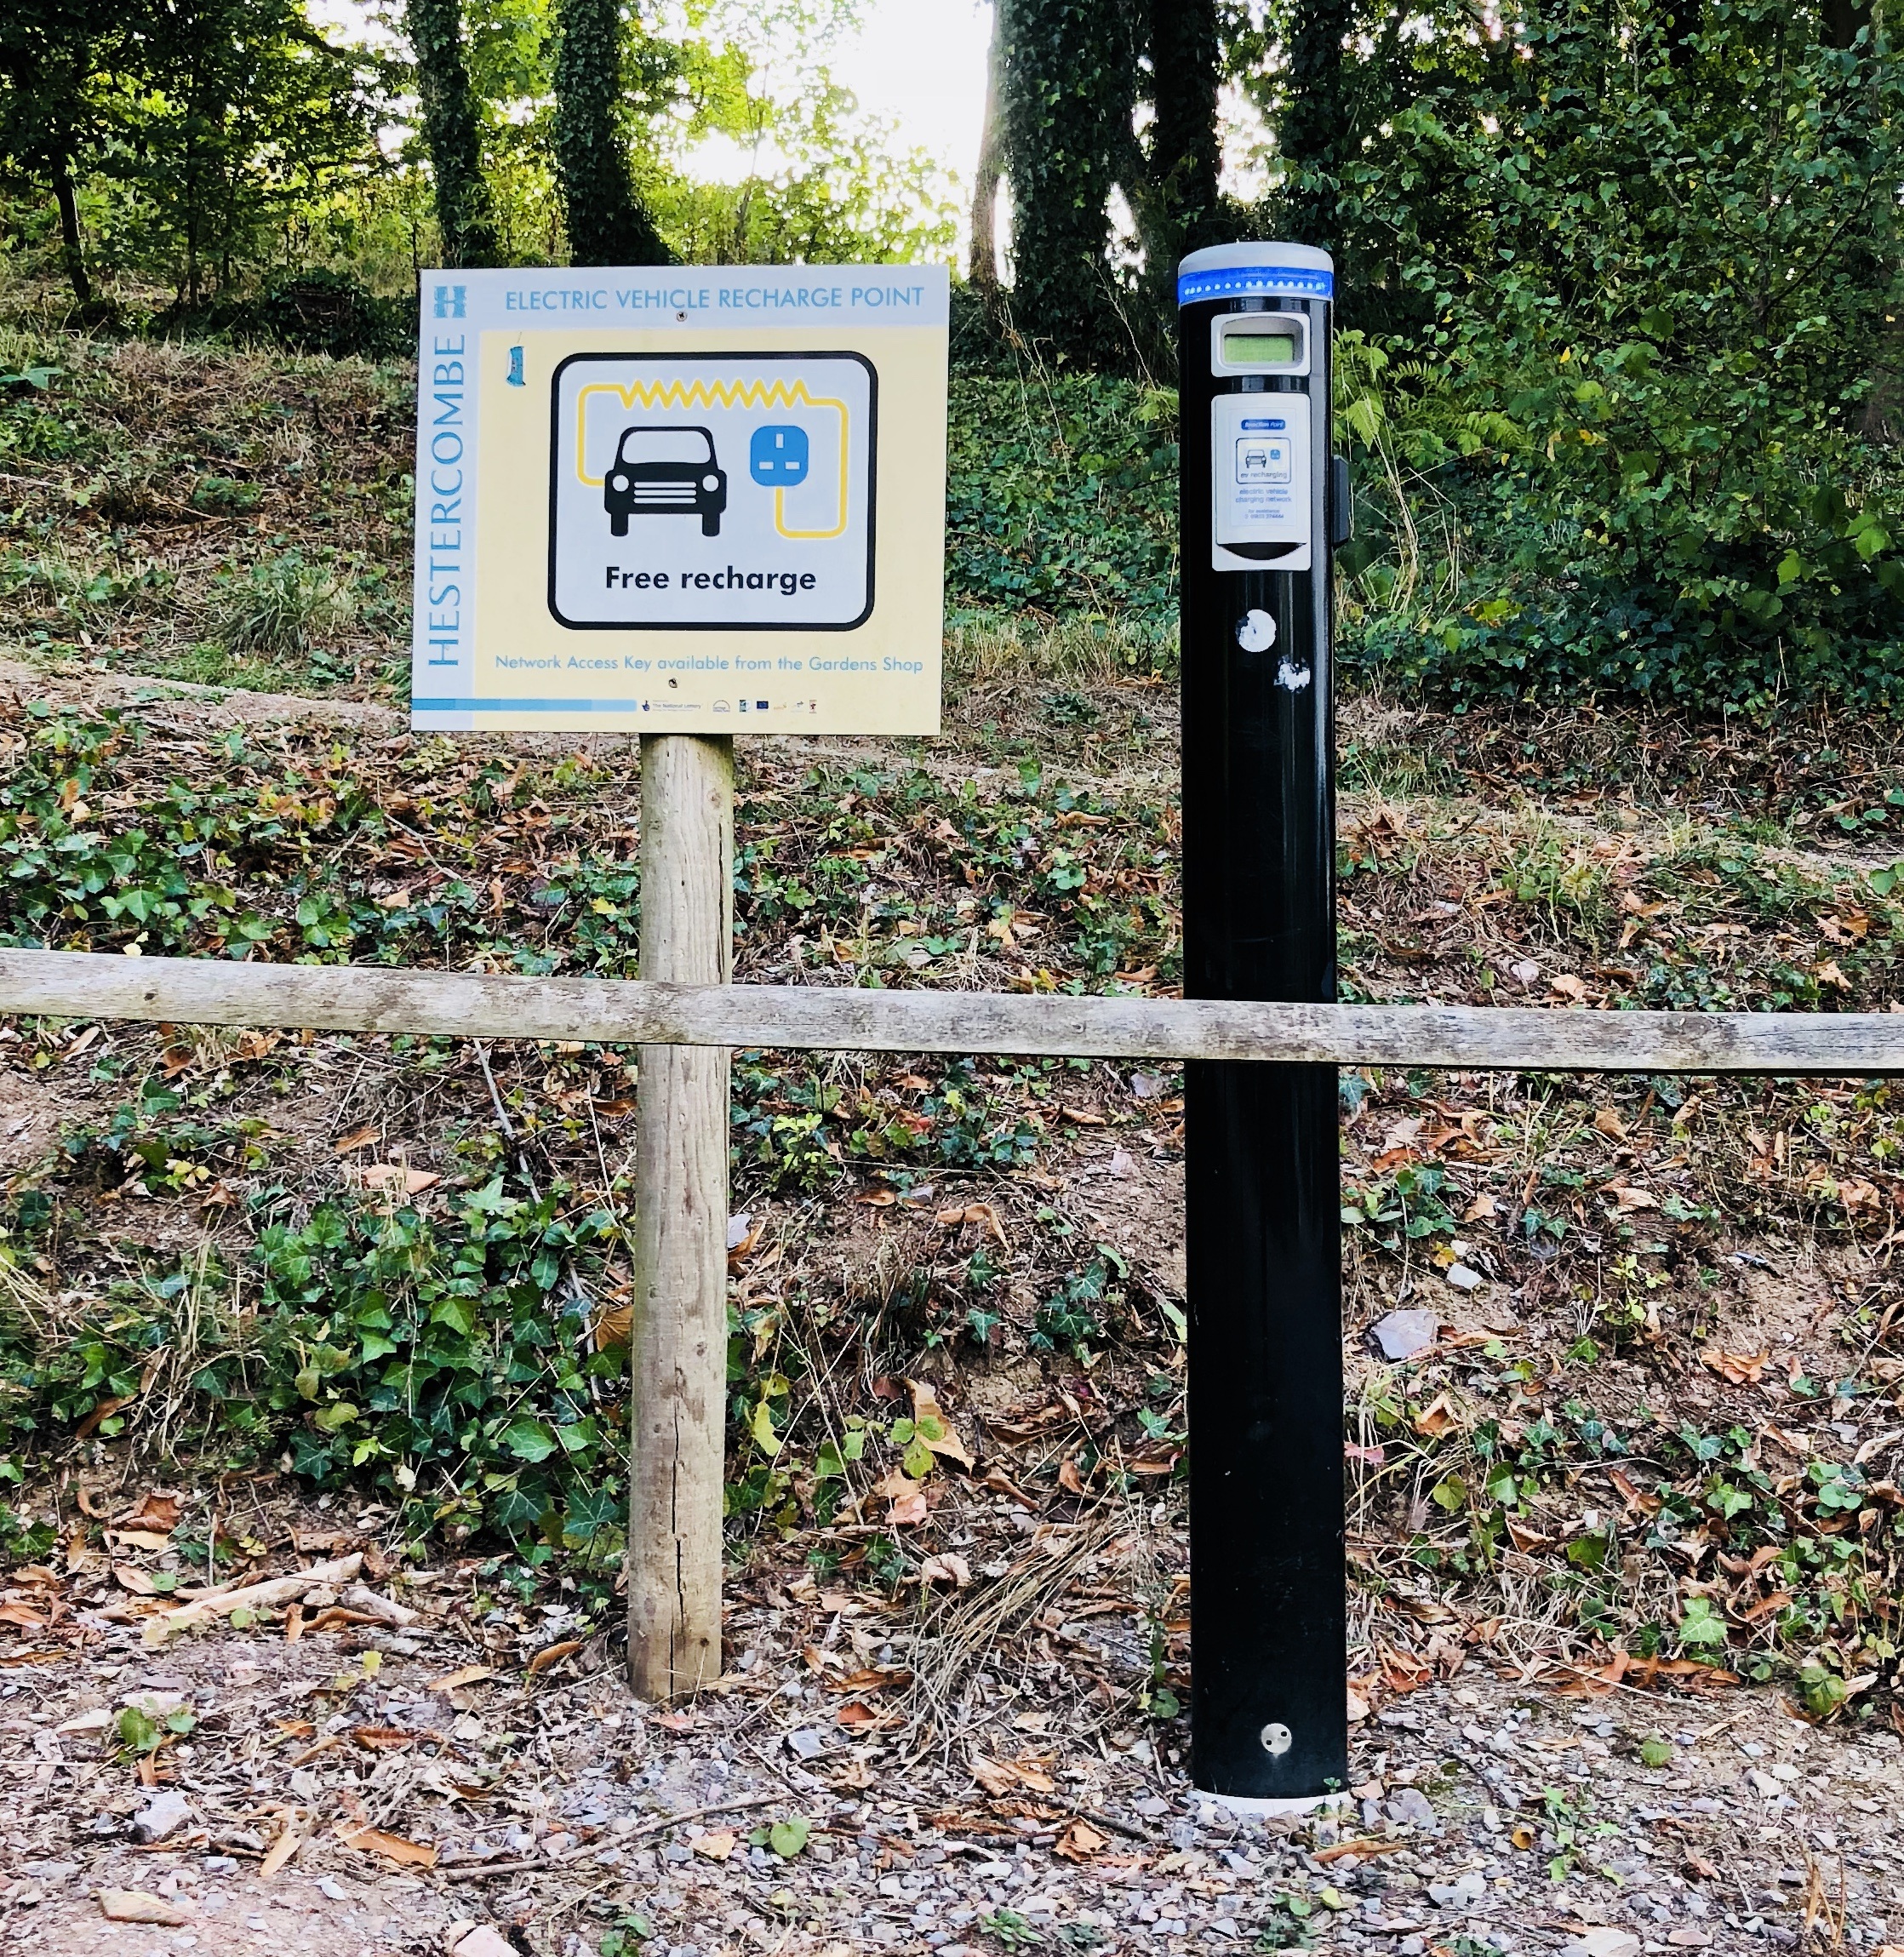 Hestercombe's electric car charging point